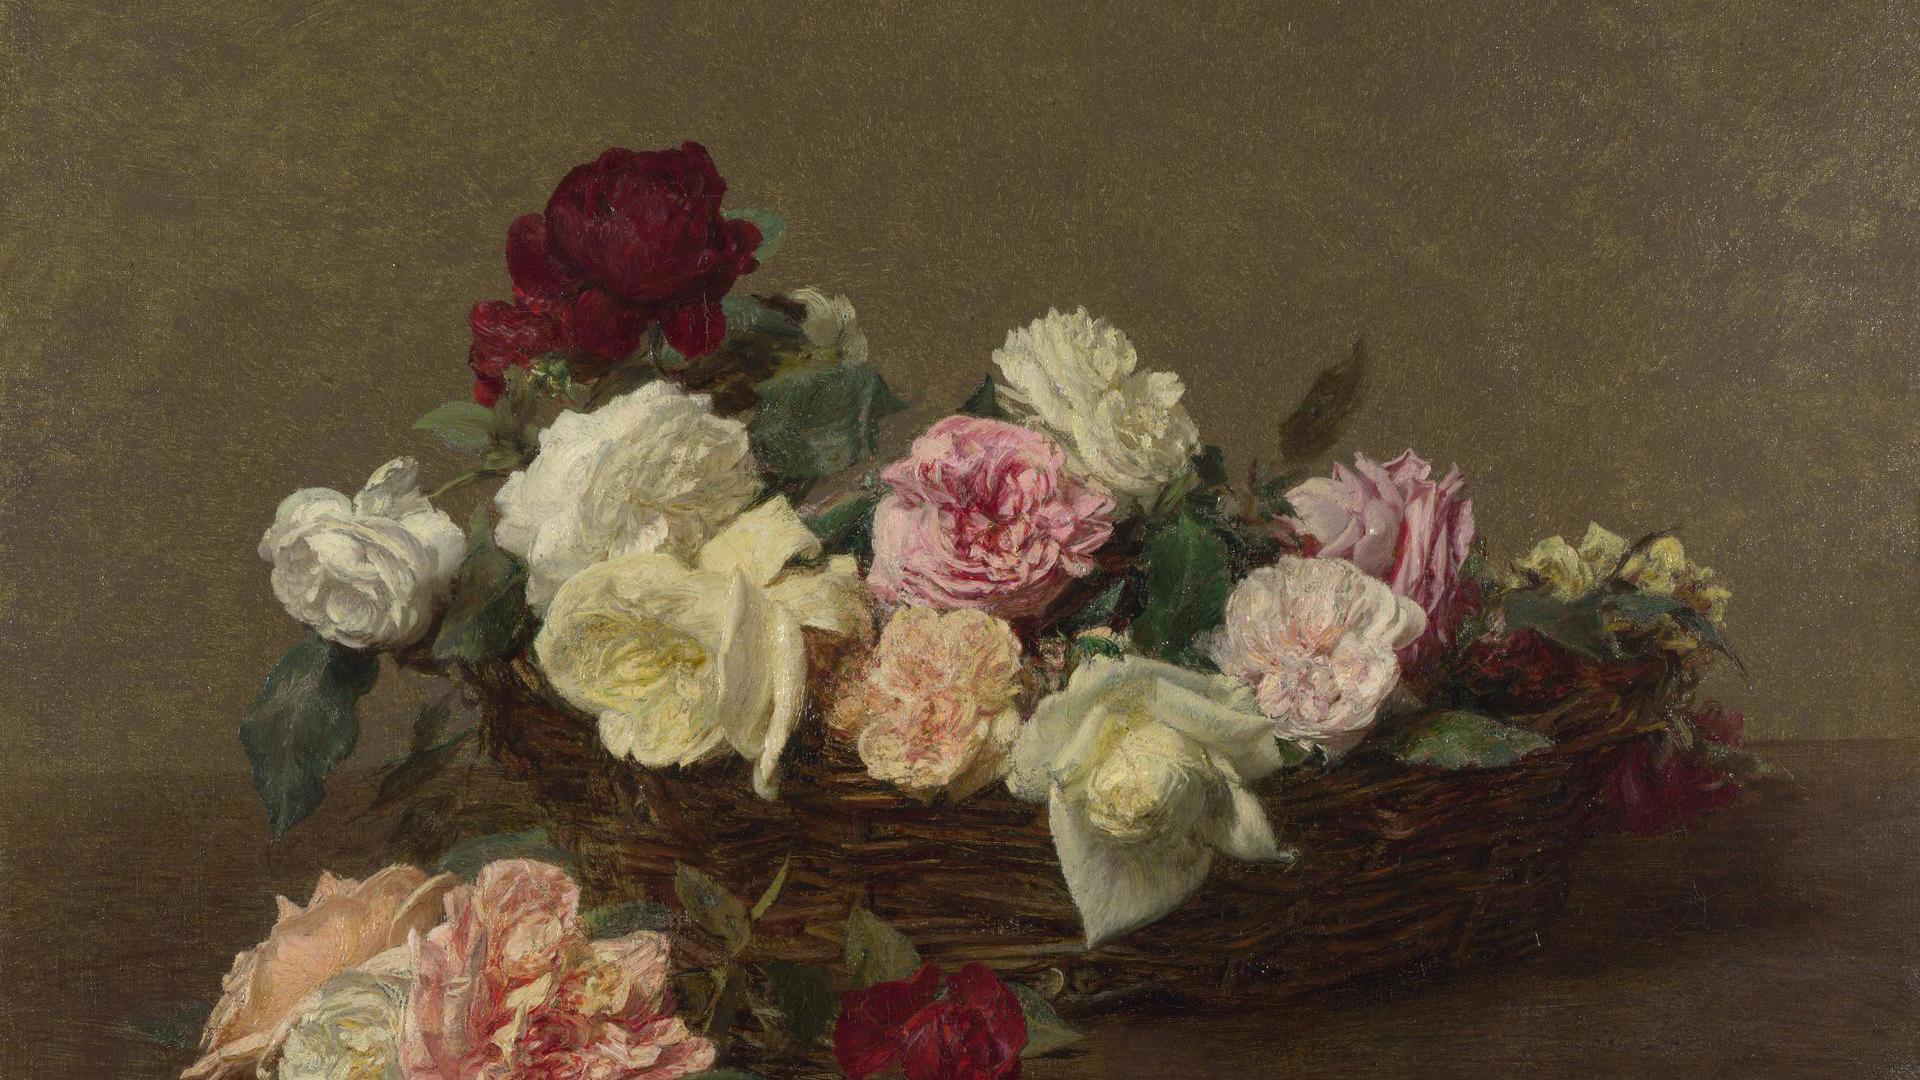 A Basket of Roses by Ignace-Henri-Théodore Fantin-Latour